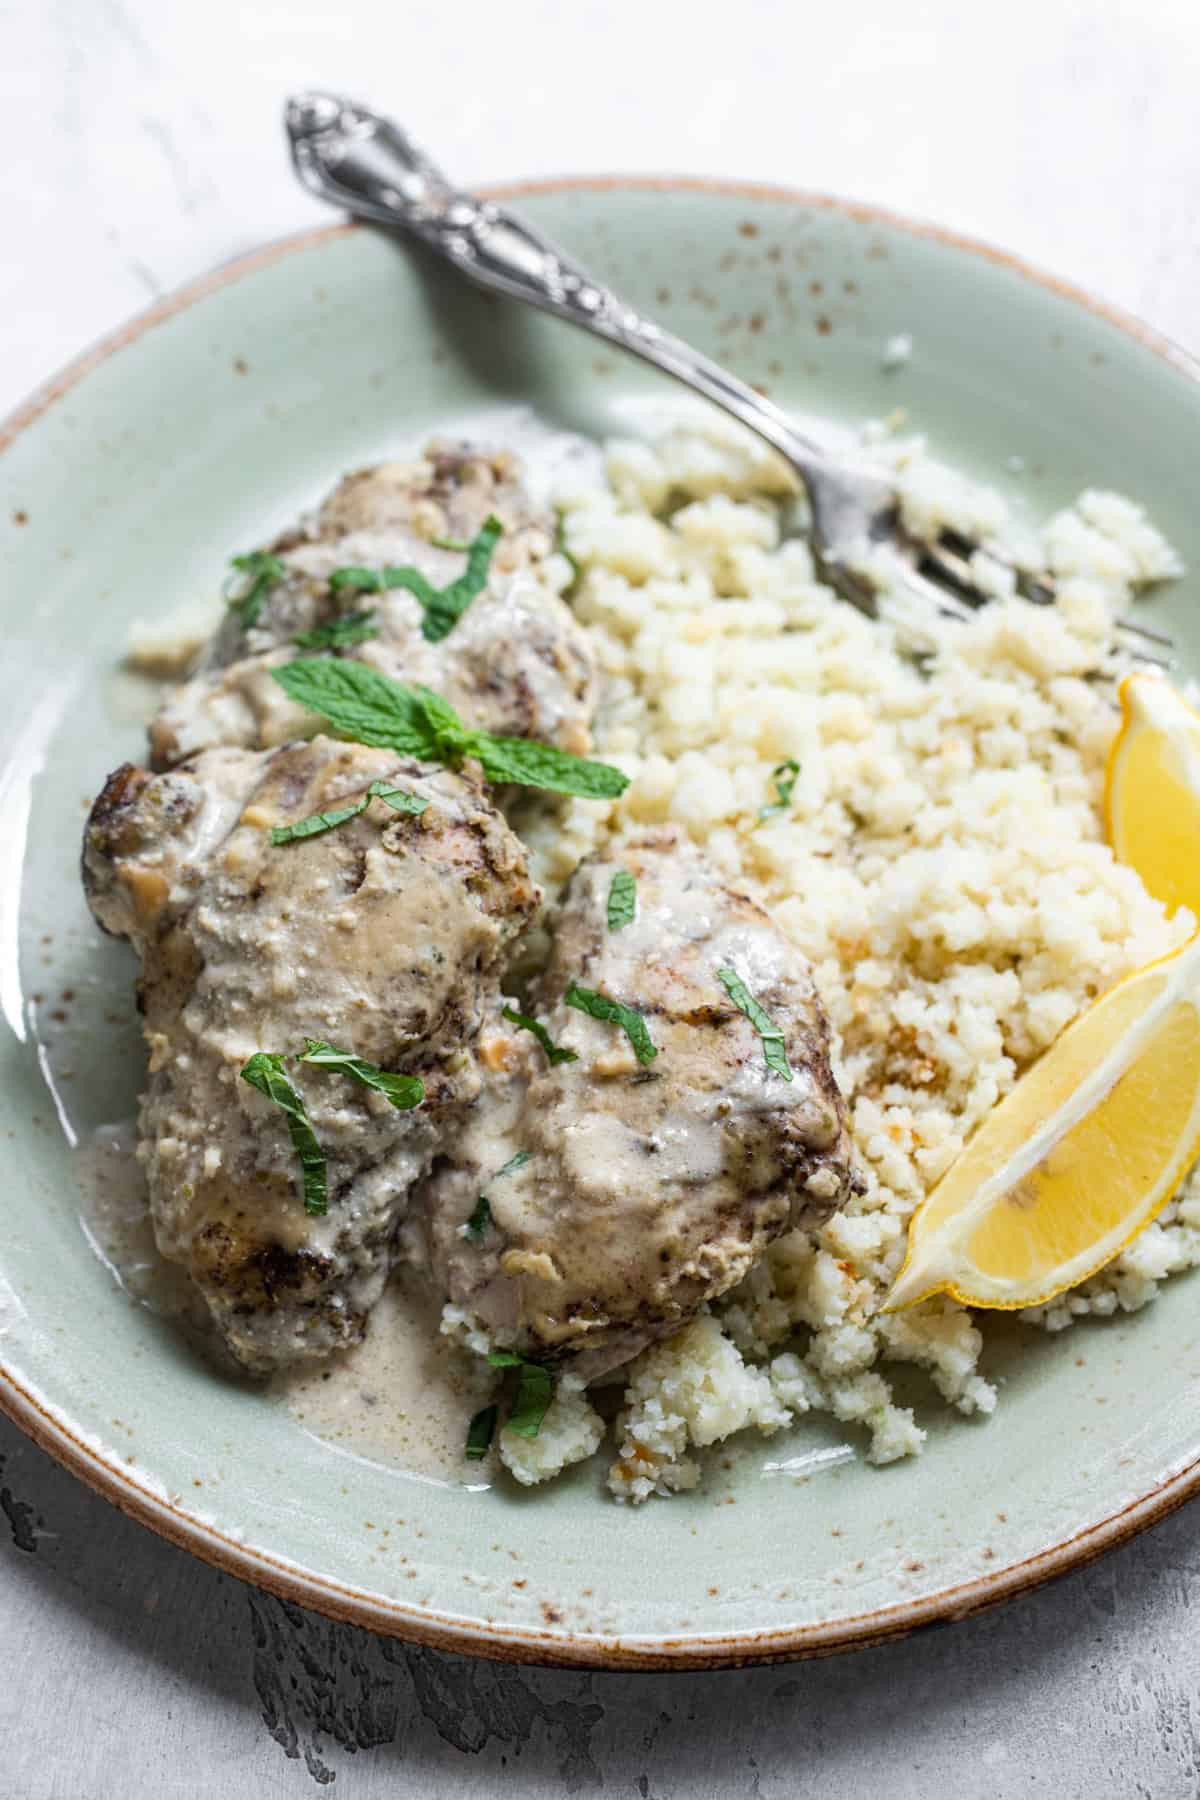 Keto Slow Cooker Chicken Thighs Inspirational Easy Middle Eastern Keto Slow Cooker Chicken Thighs